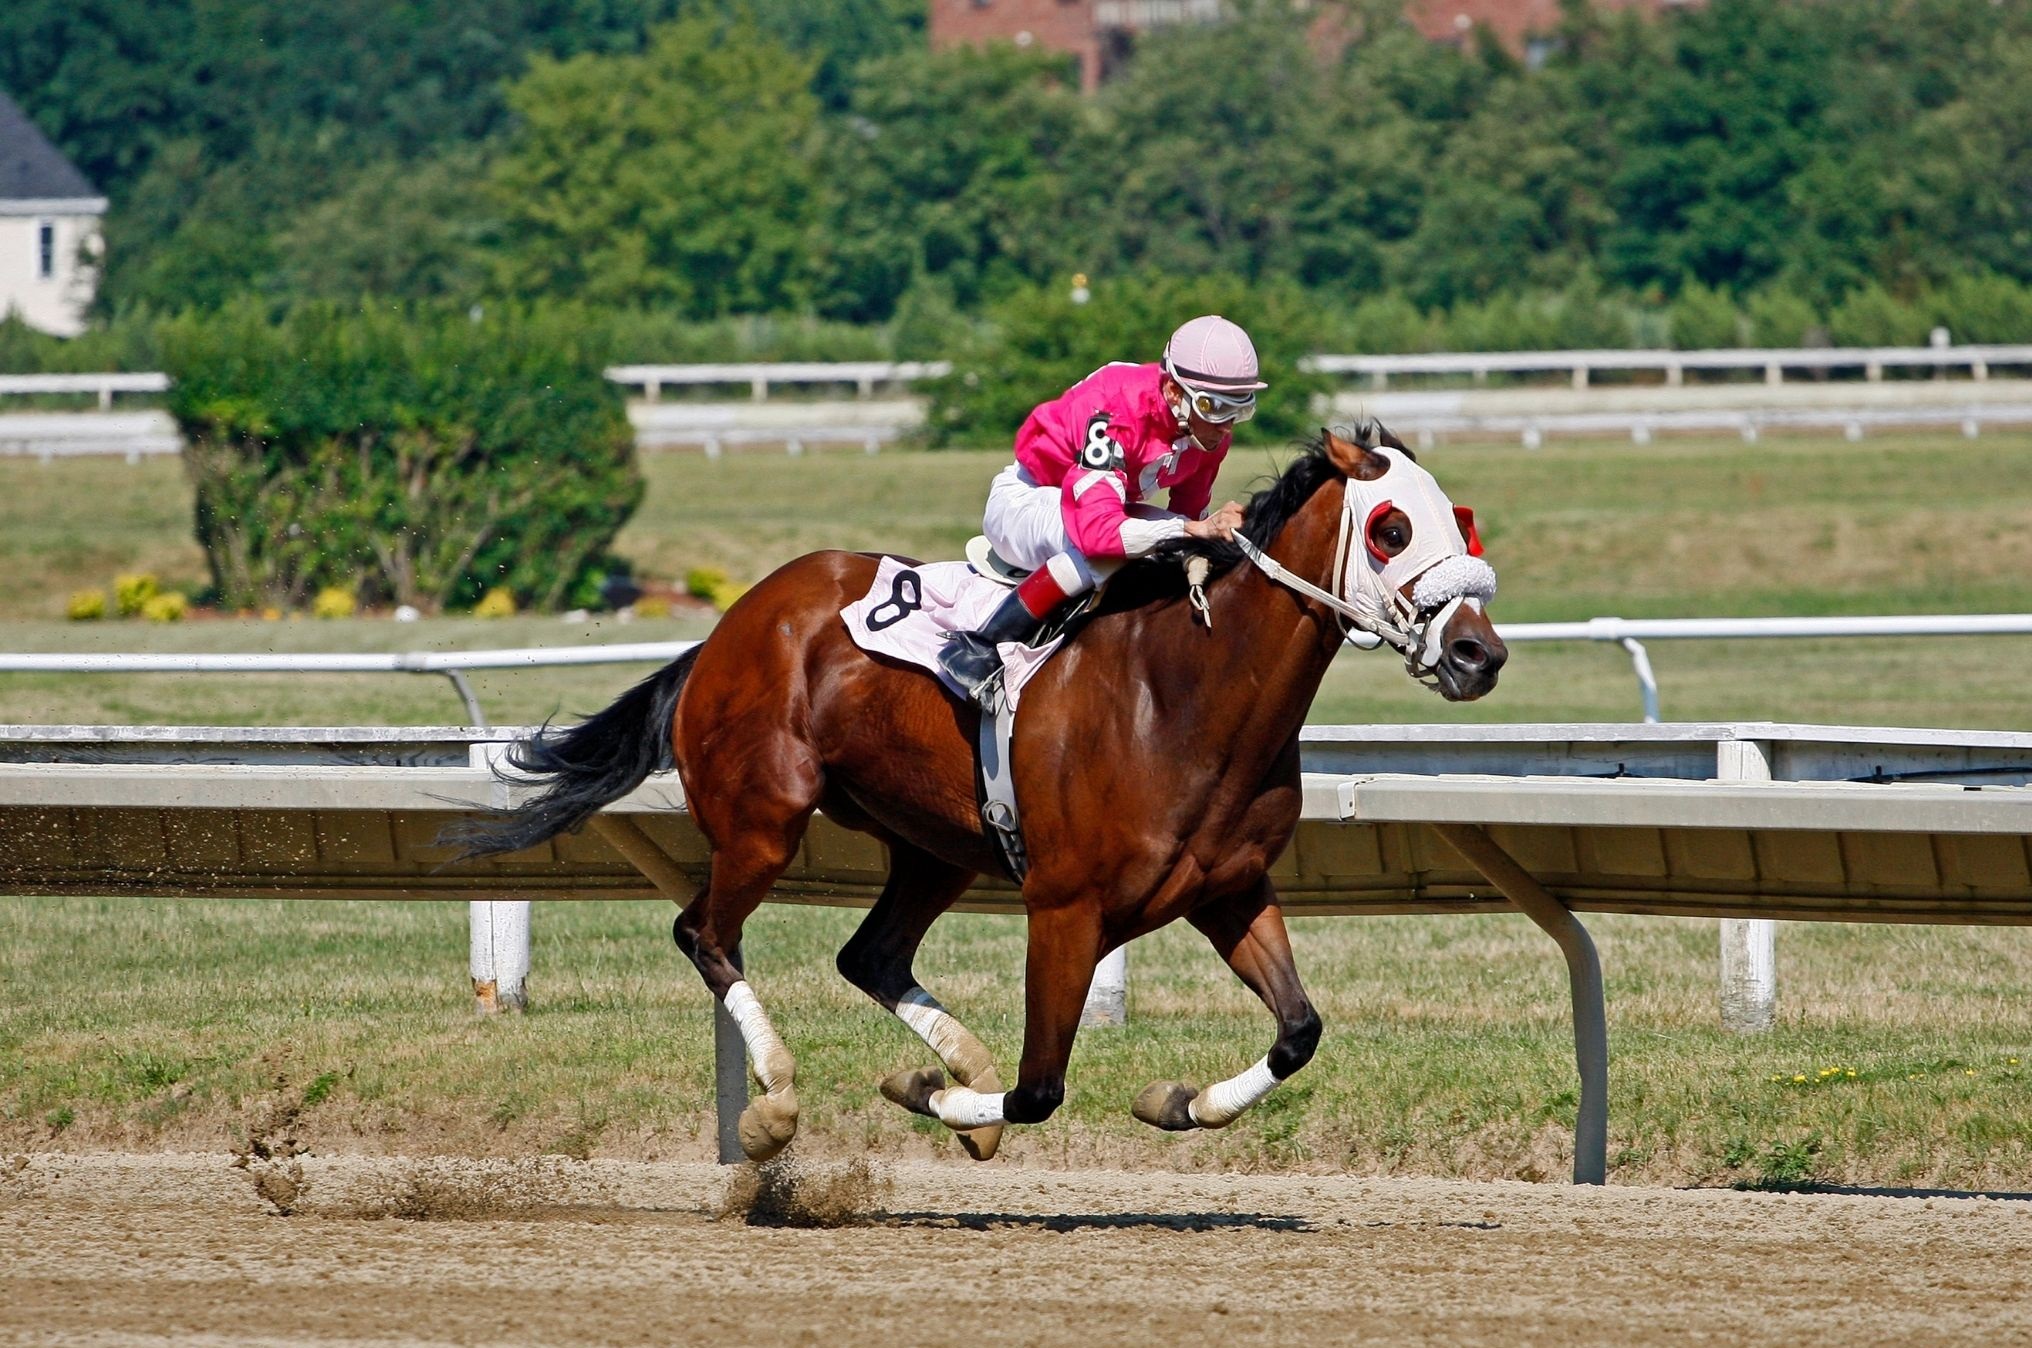 The Best Horse Breeds for Racing